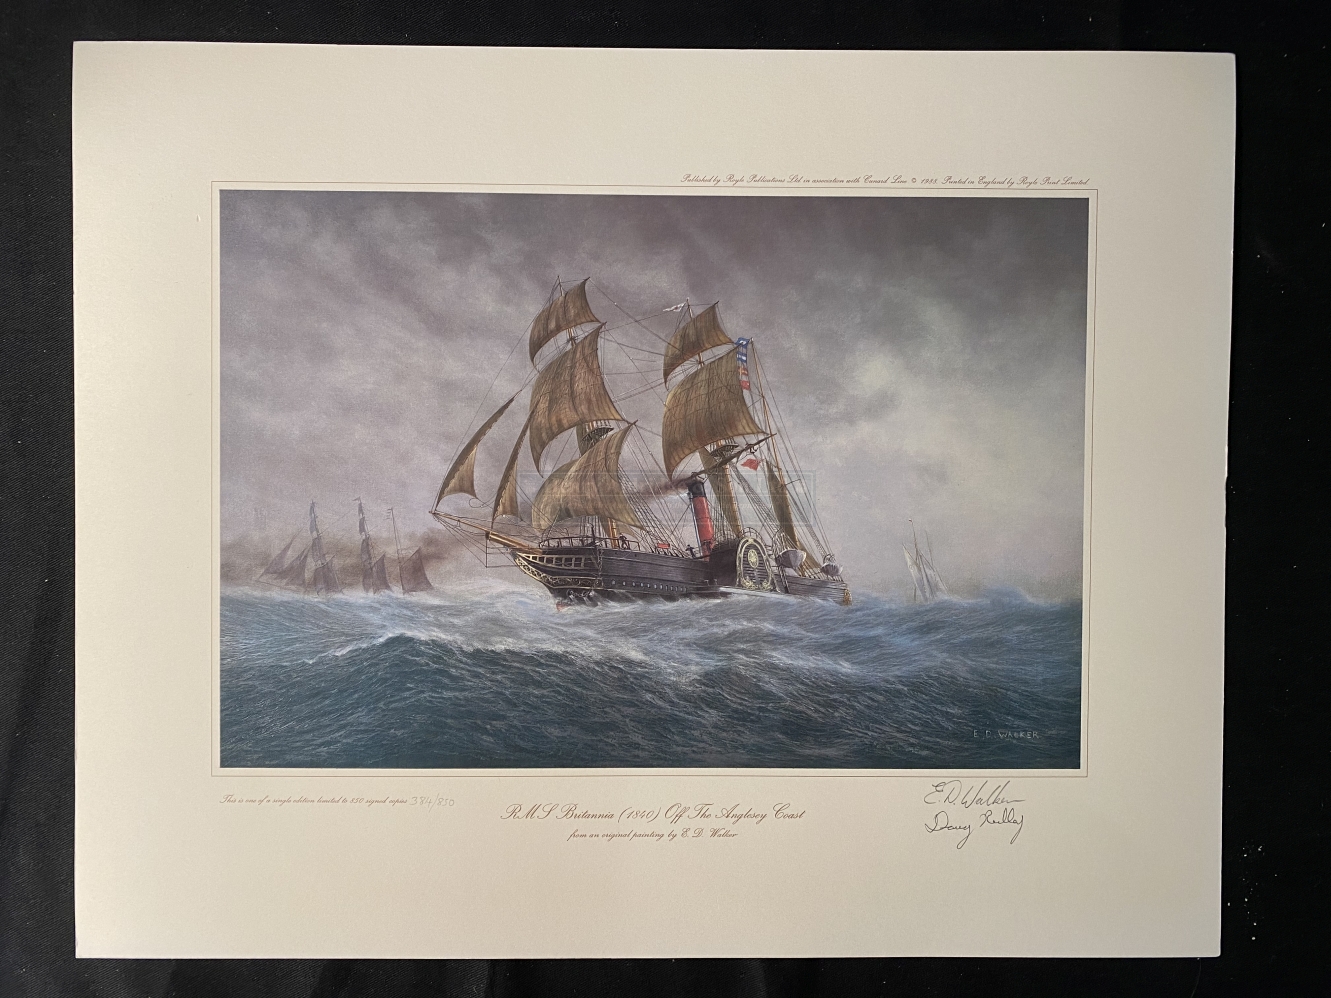 LIMITED EDITION PRINTS: Portfolio of Cunard Liners prints signed by the artists E. D. Walker and